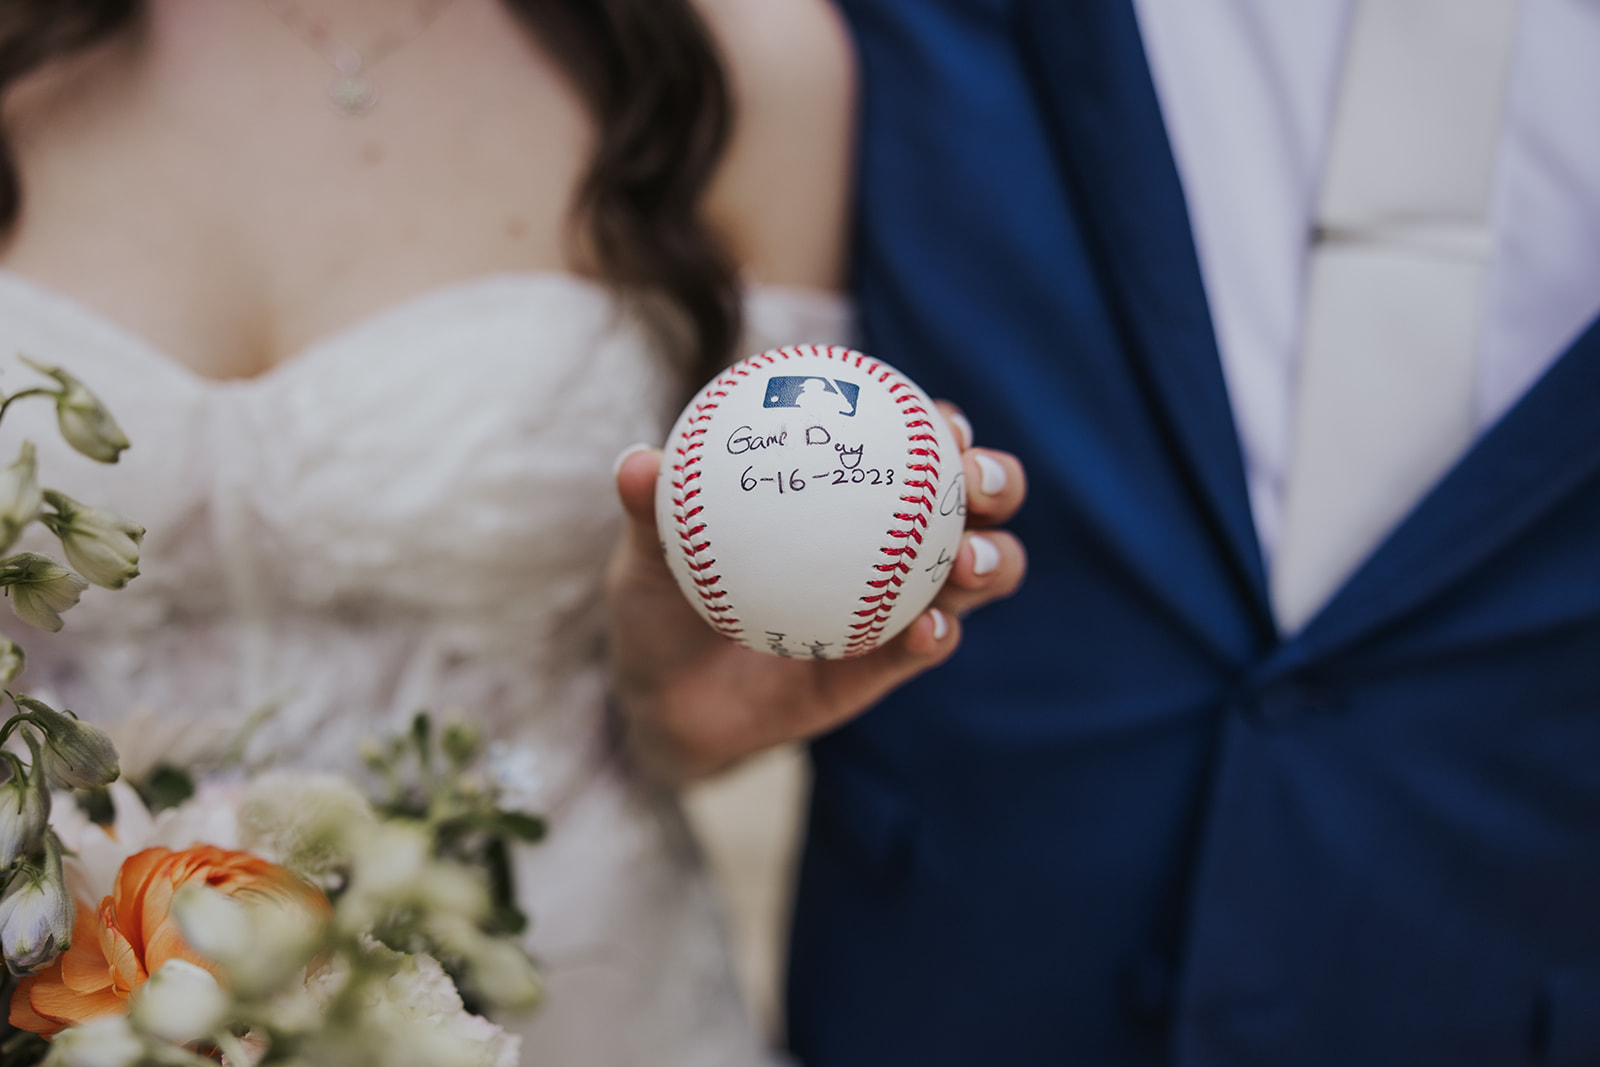 A baseball that has notes from the bride and groom written on it